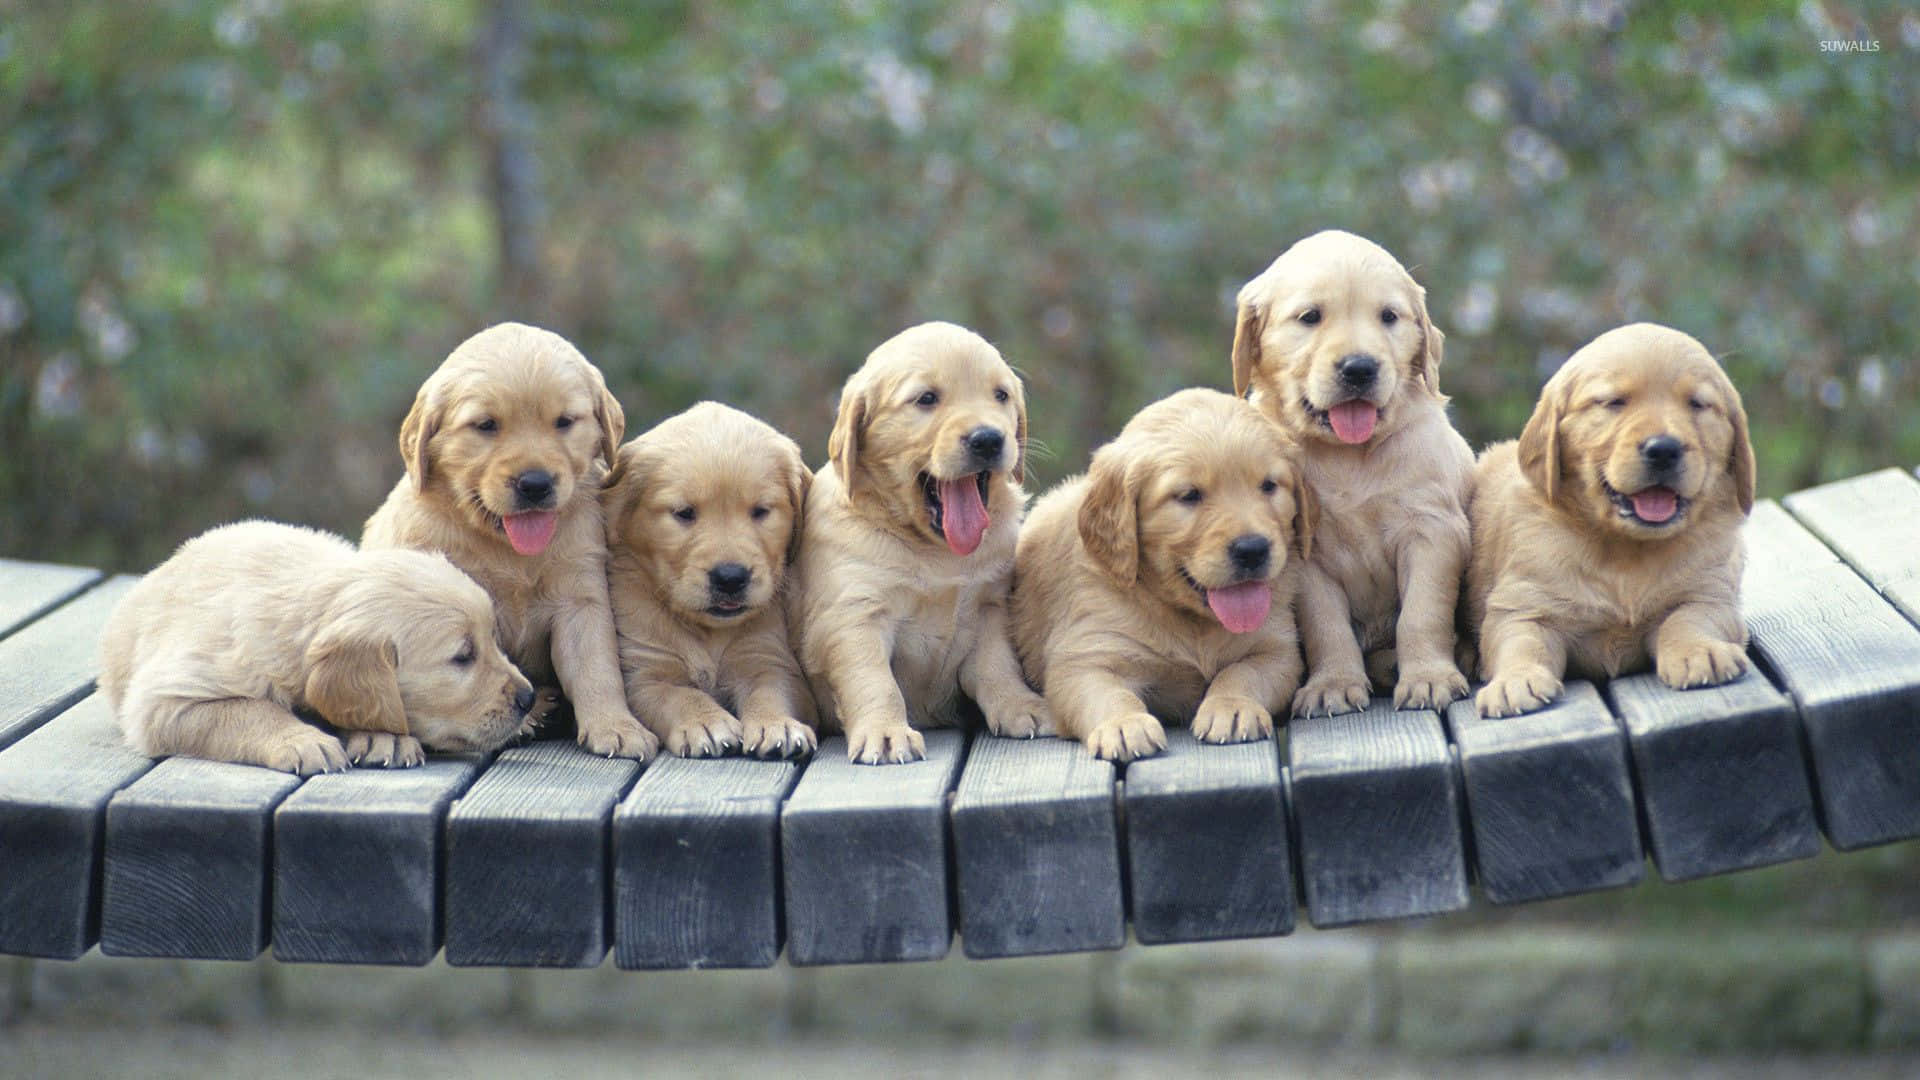 Explore The World With This Golden Retriever Puppy Background